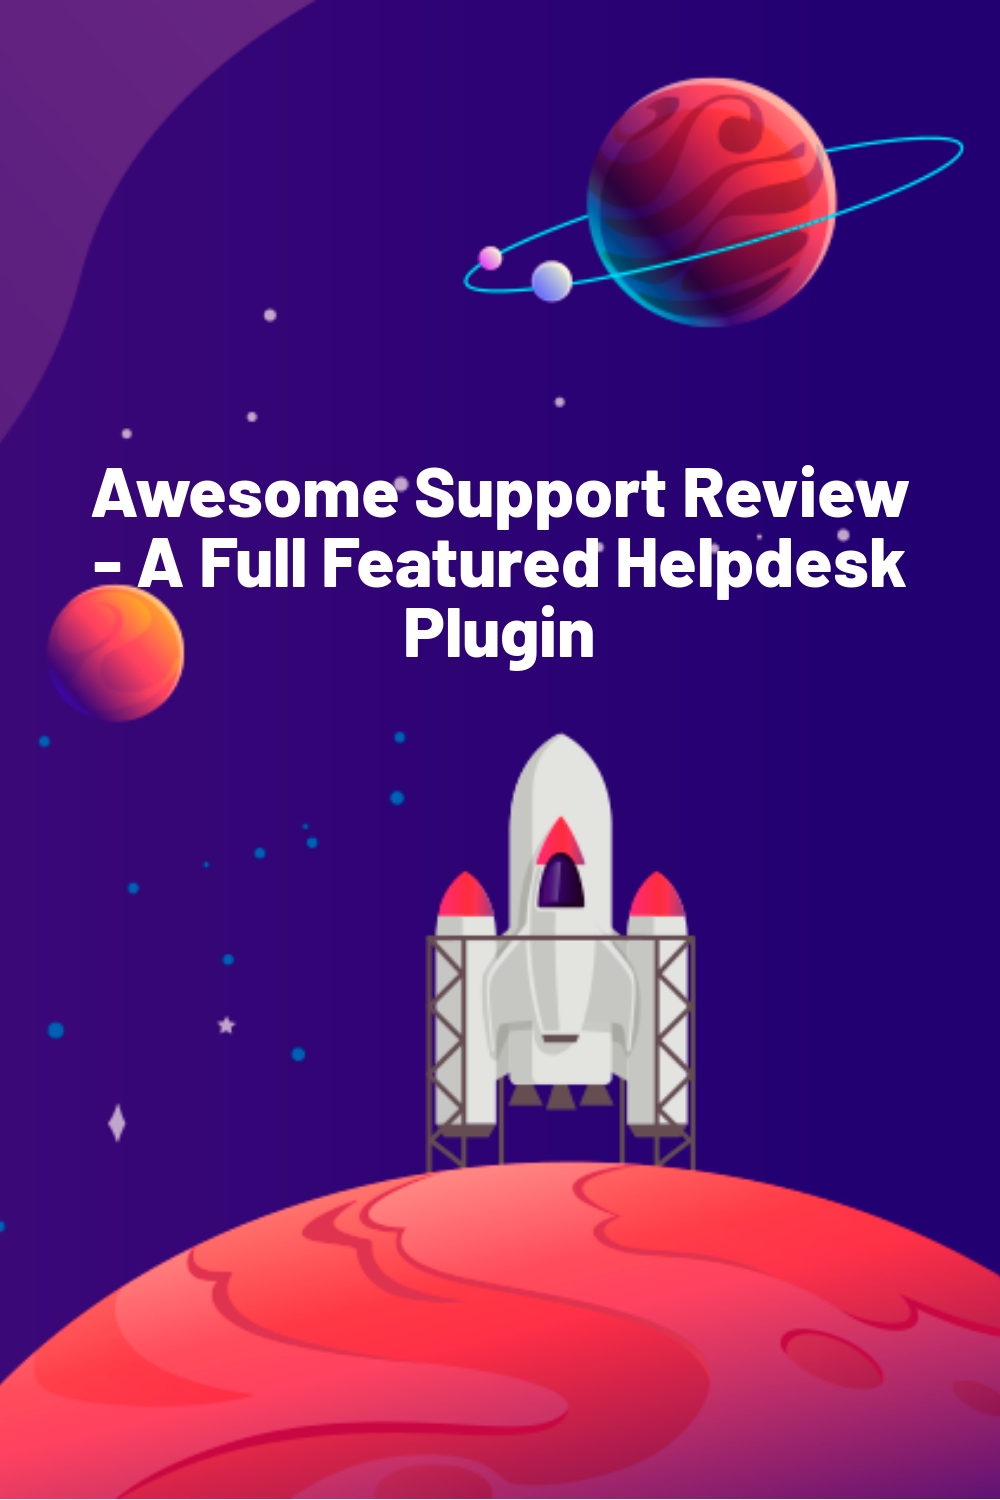 Awesome Support Review – A Full Featured Helpdesk Plugin